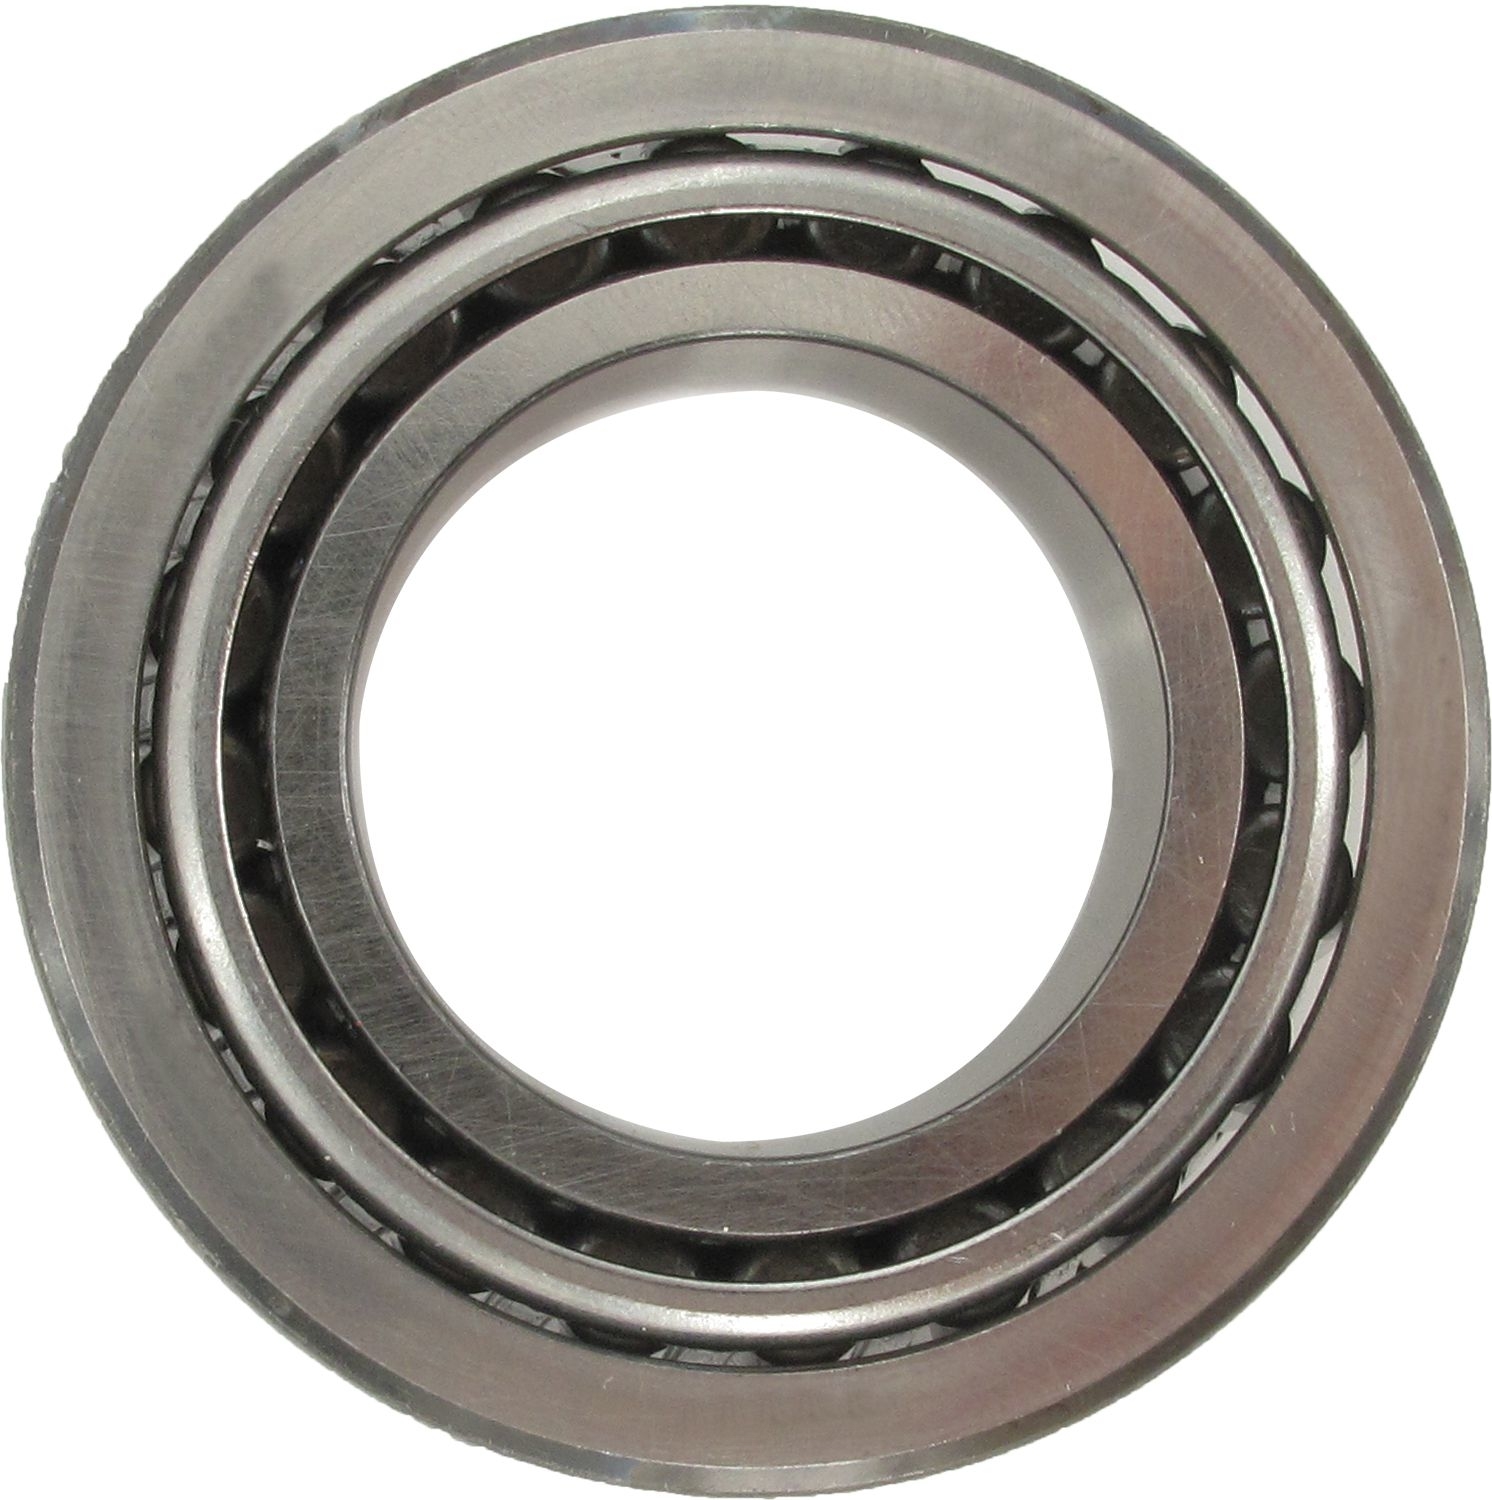 SKF (CHICAGO RAWHIDE) - Manual Trans Differential Bearing - SKF BR6 VP